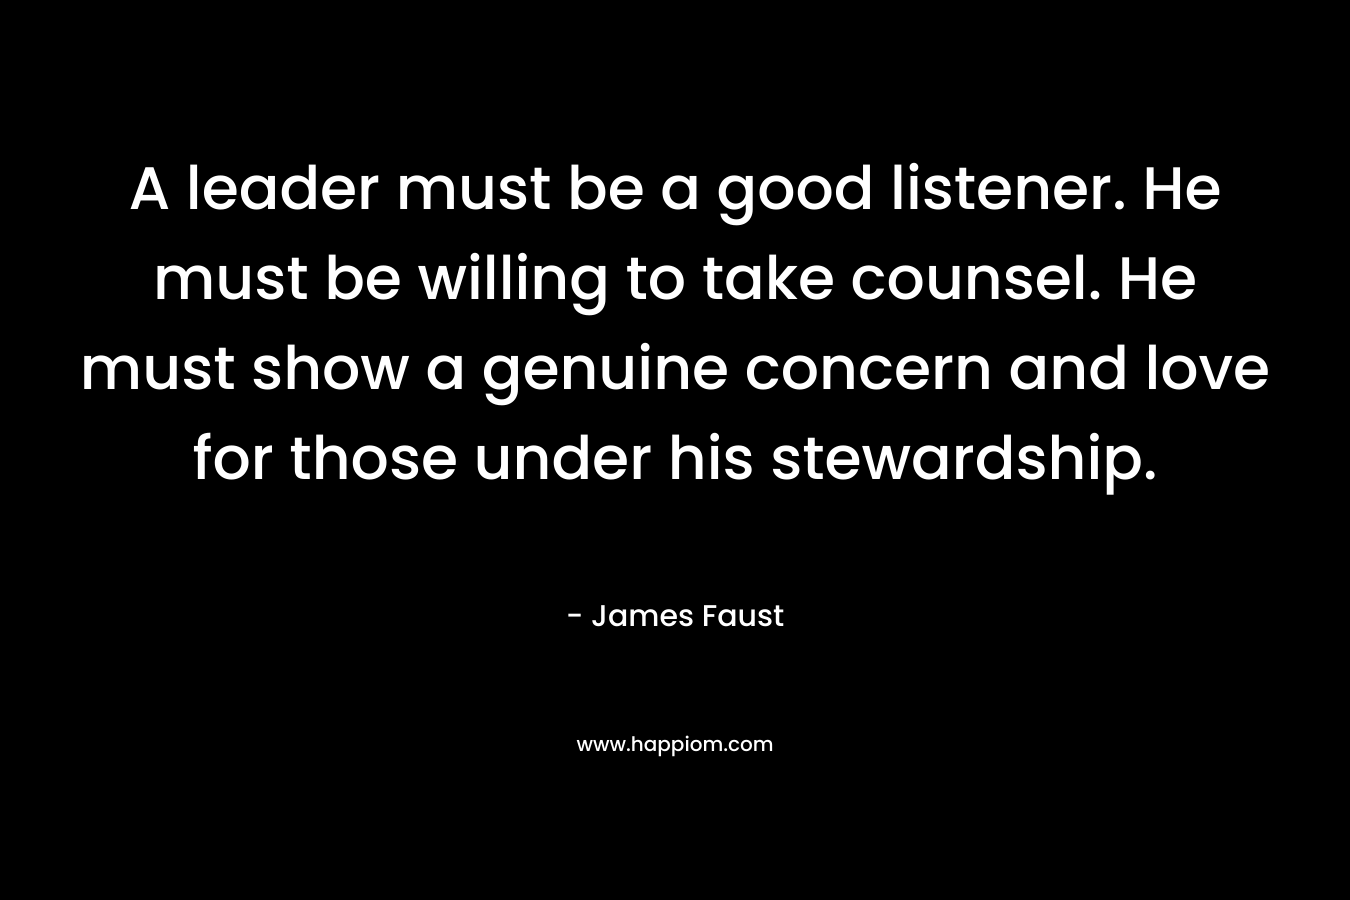 A leader must be a good listener. He must be willing to take counsel. He must show a genuine concern and love for those under his stewardship.